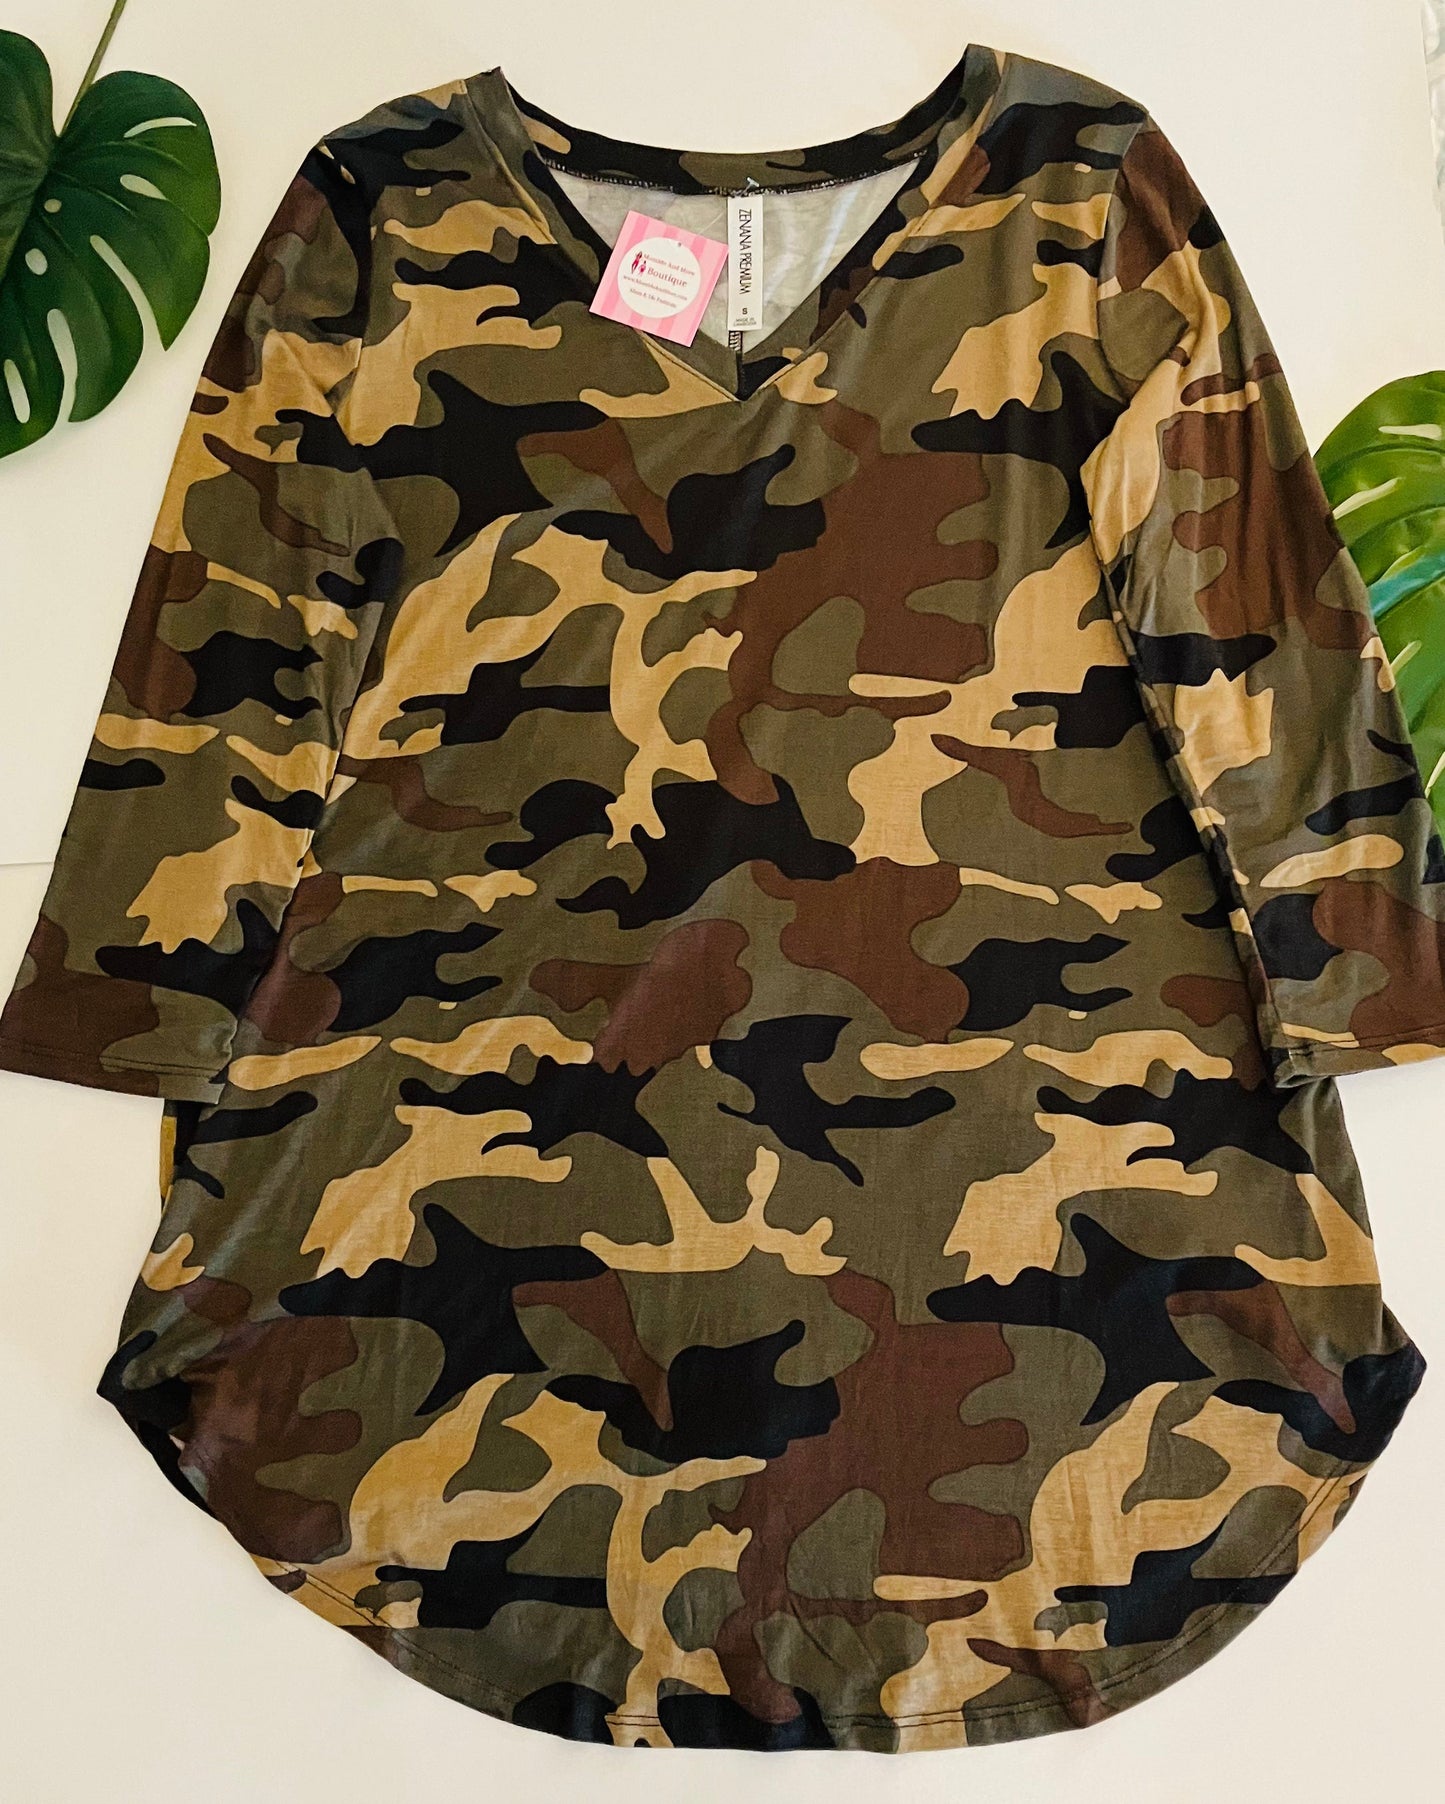 Womens Green Camouflage Top | 3/4 Sleeve Shirt | V-Neck Shirt Tops MomMe and More 